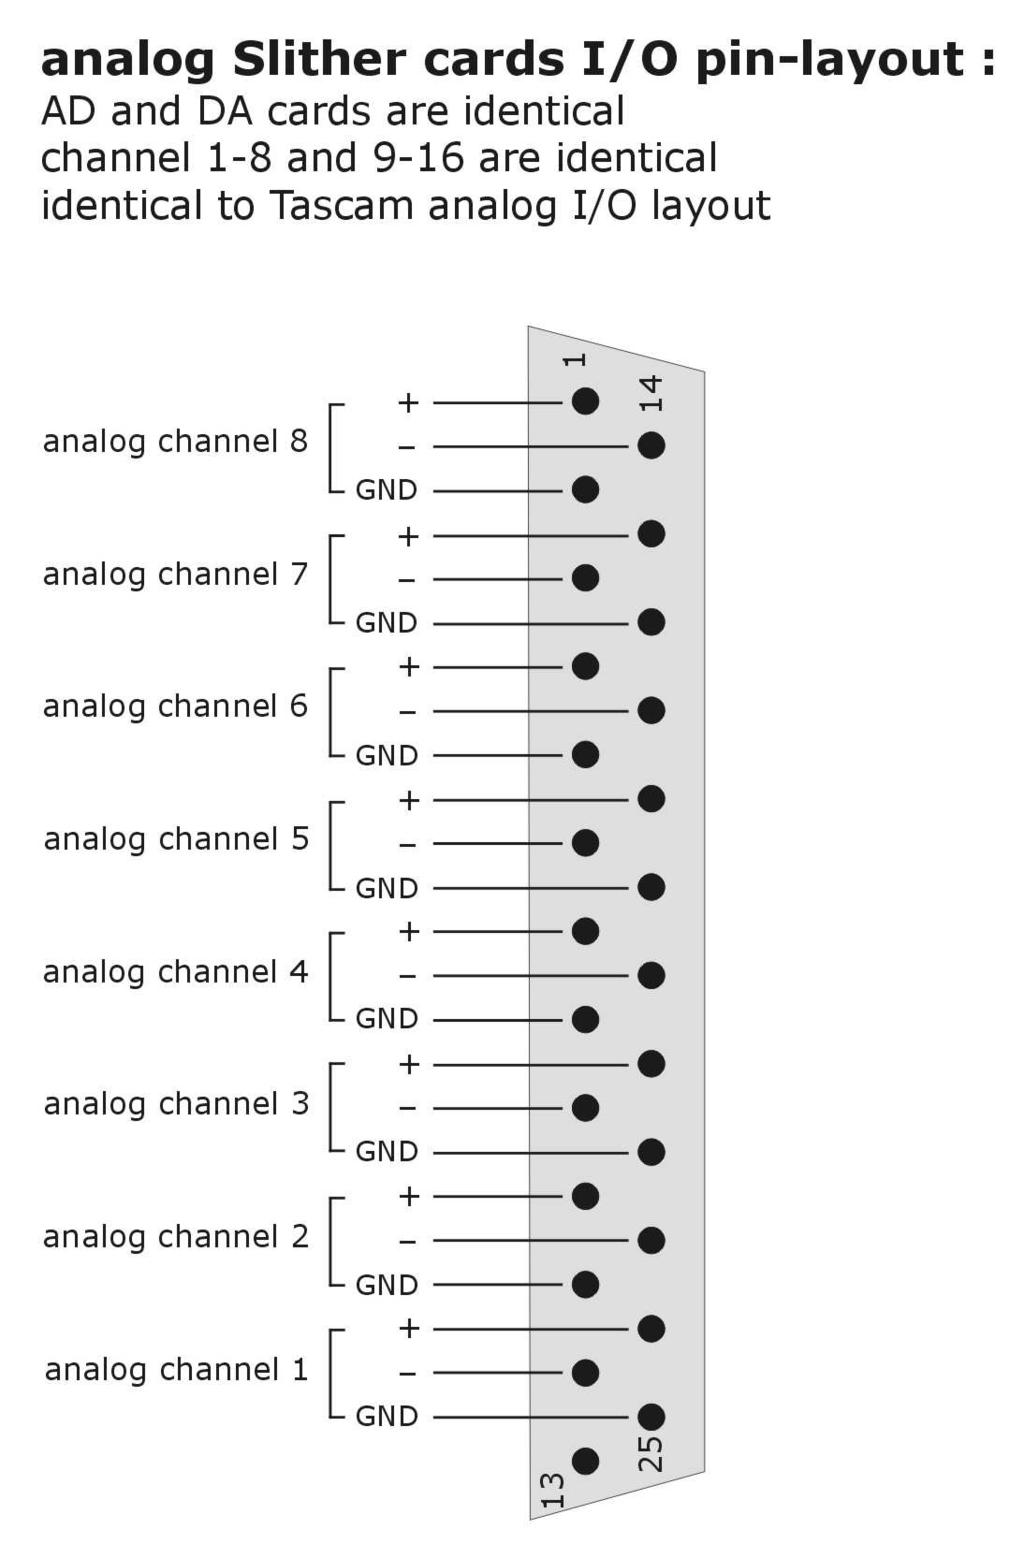 SLITHER PIN-OUTS ANALOGUE AND MIC / LINE 1 Channel 8 HOT 14 Channel 8 COLD 2 Channel 8 GROUND 15 Channel 7 HOT 3 Channel 7 COLD 16 Channel 7 GROUND 4 Channel 6 HOT 17 Channel 6 COLD 5 Channel 6